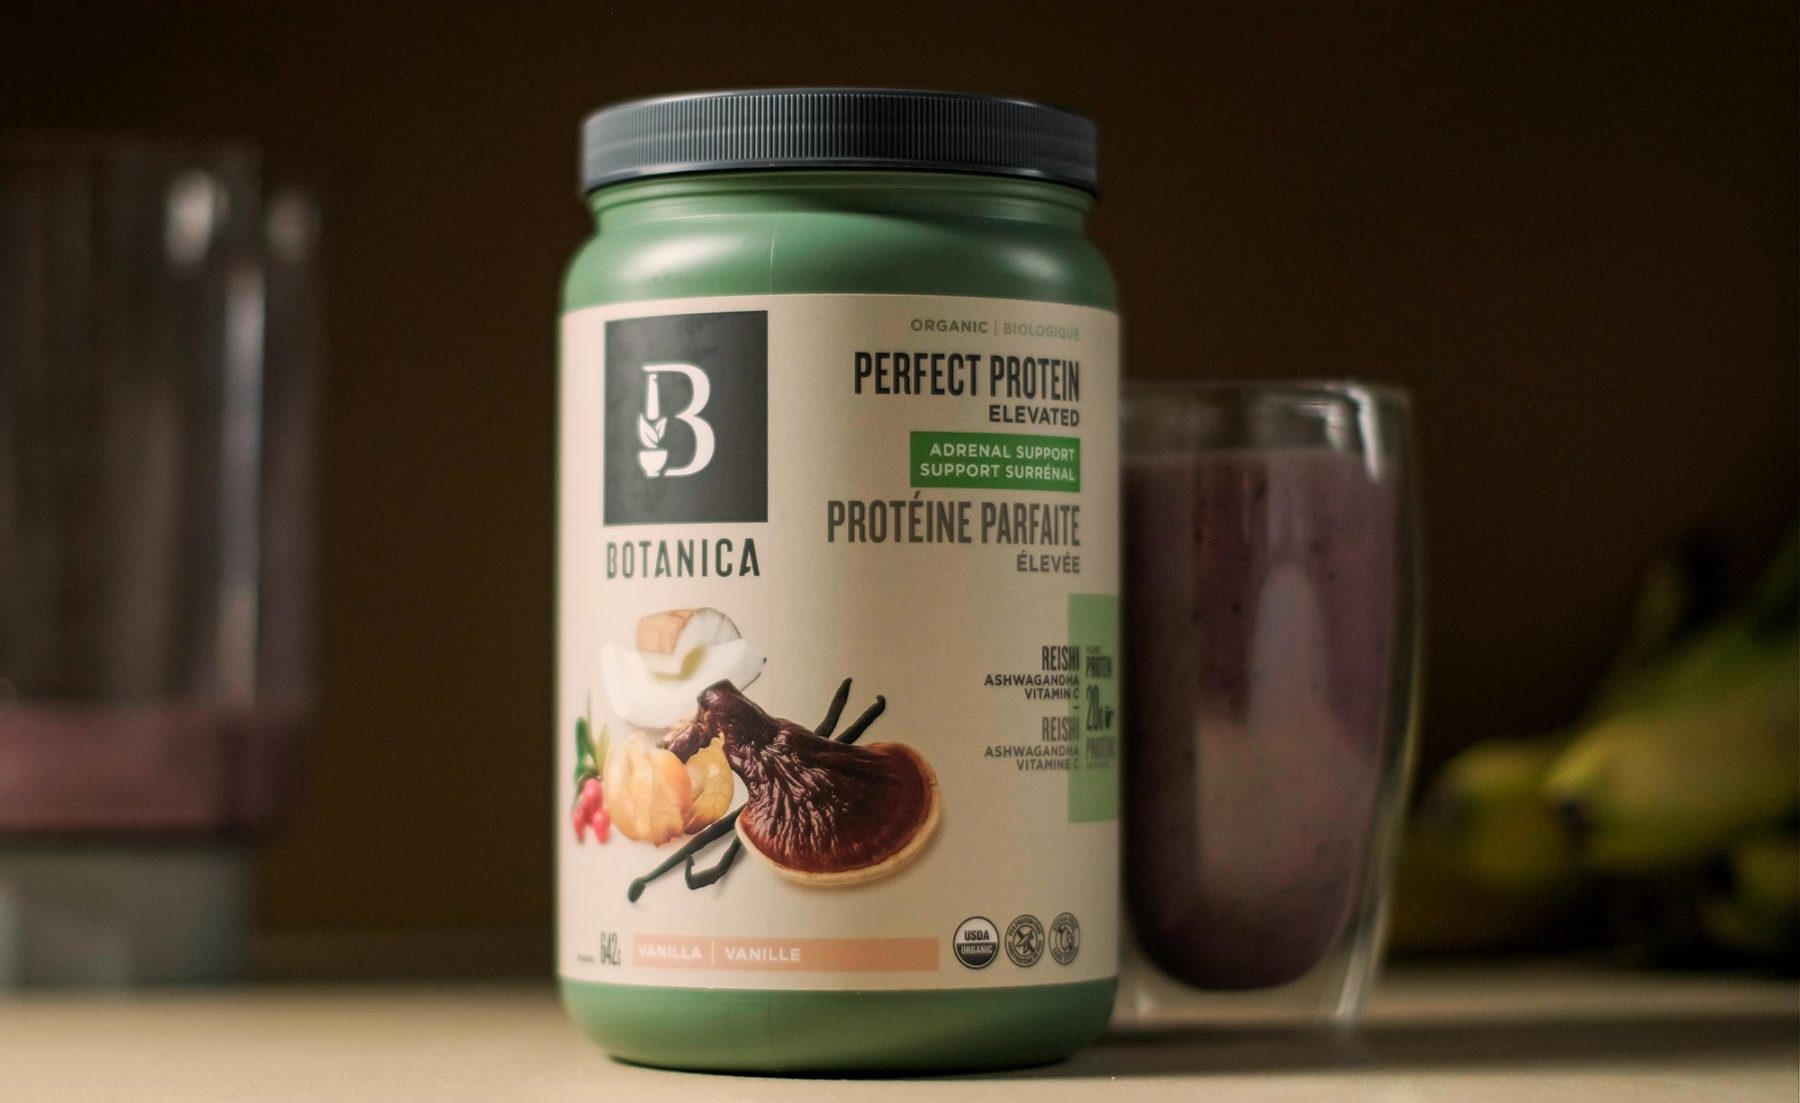 Botanica Perfect Protein Elevated Adrenal Support